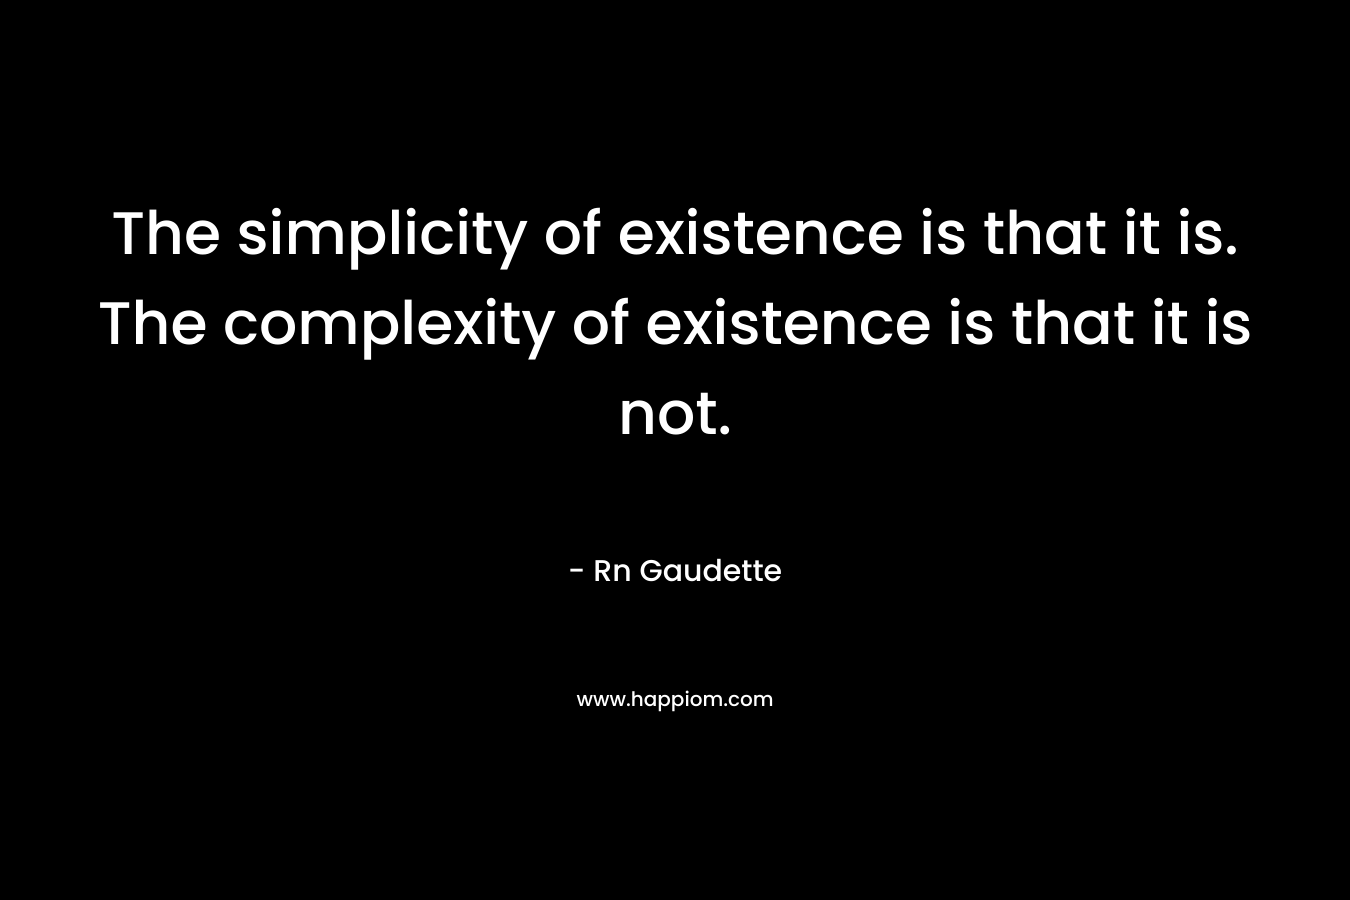 The simplicity of existence is that it is. The complexity of existence is that it is not.